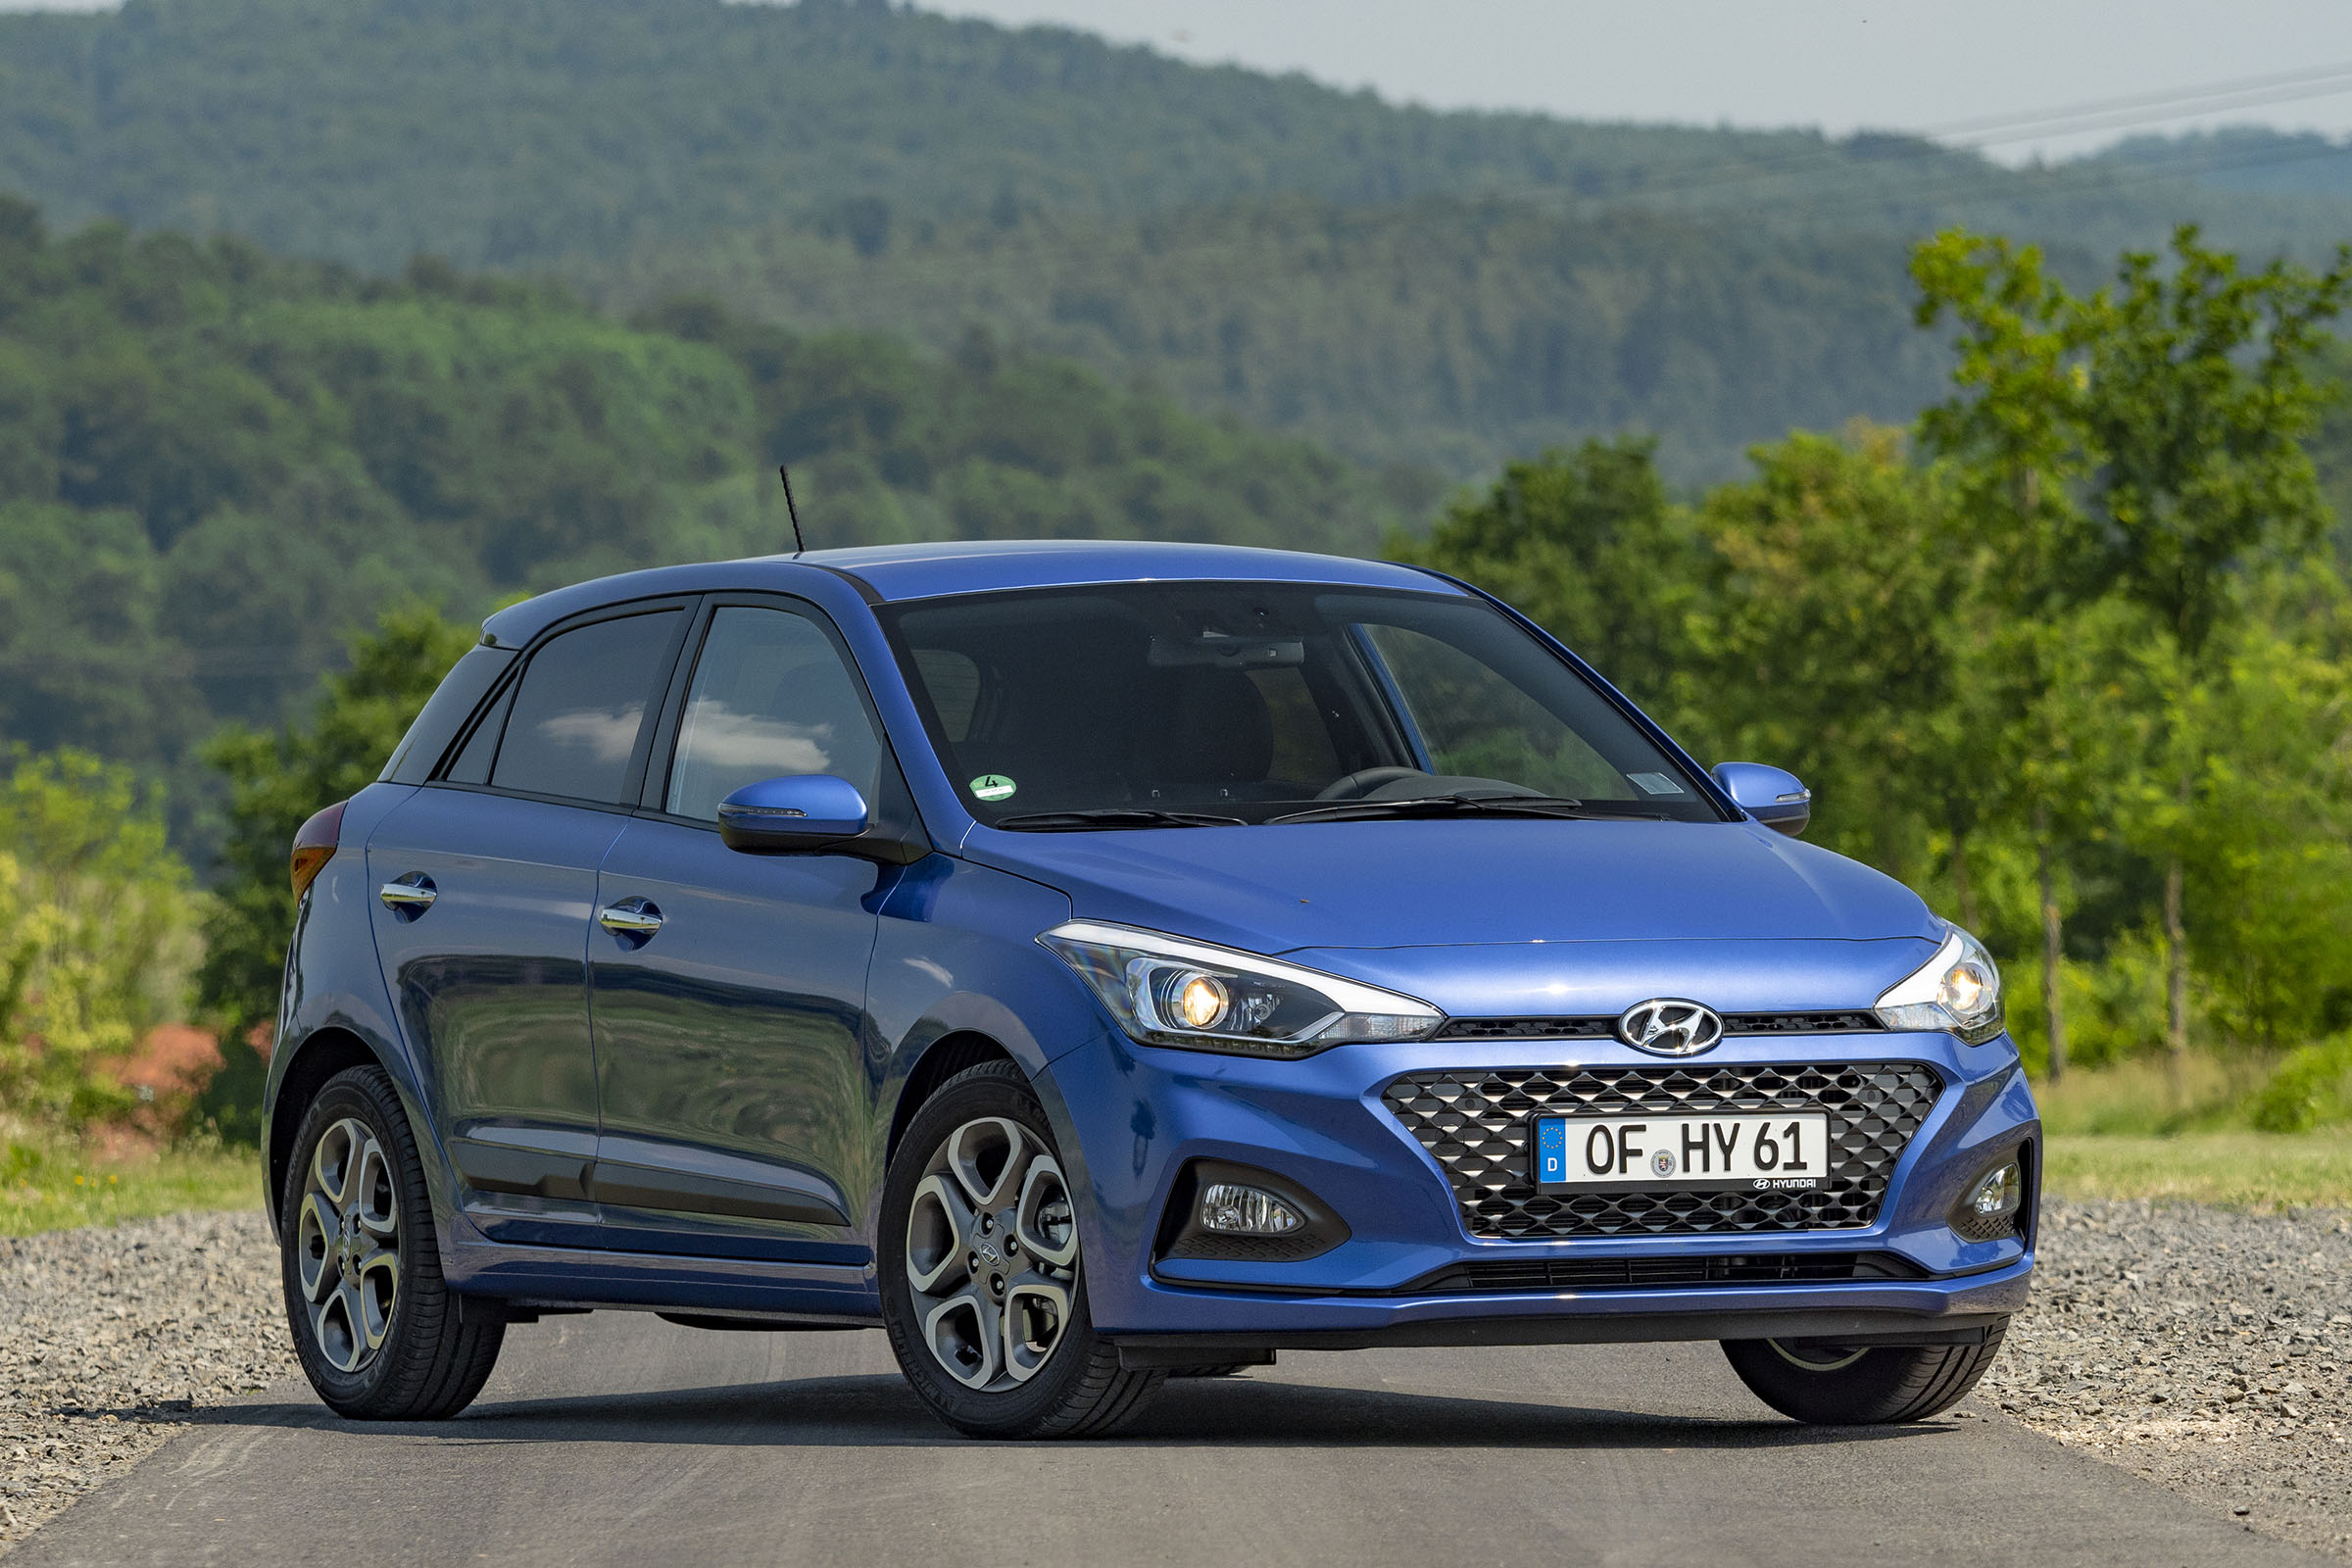 New Hyundai i20 facelift prices and specs released | Auto Express